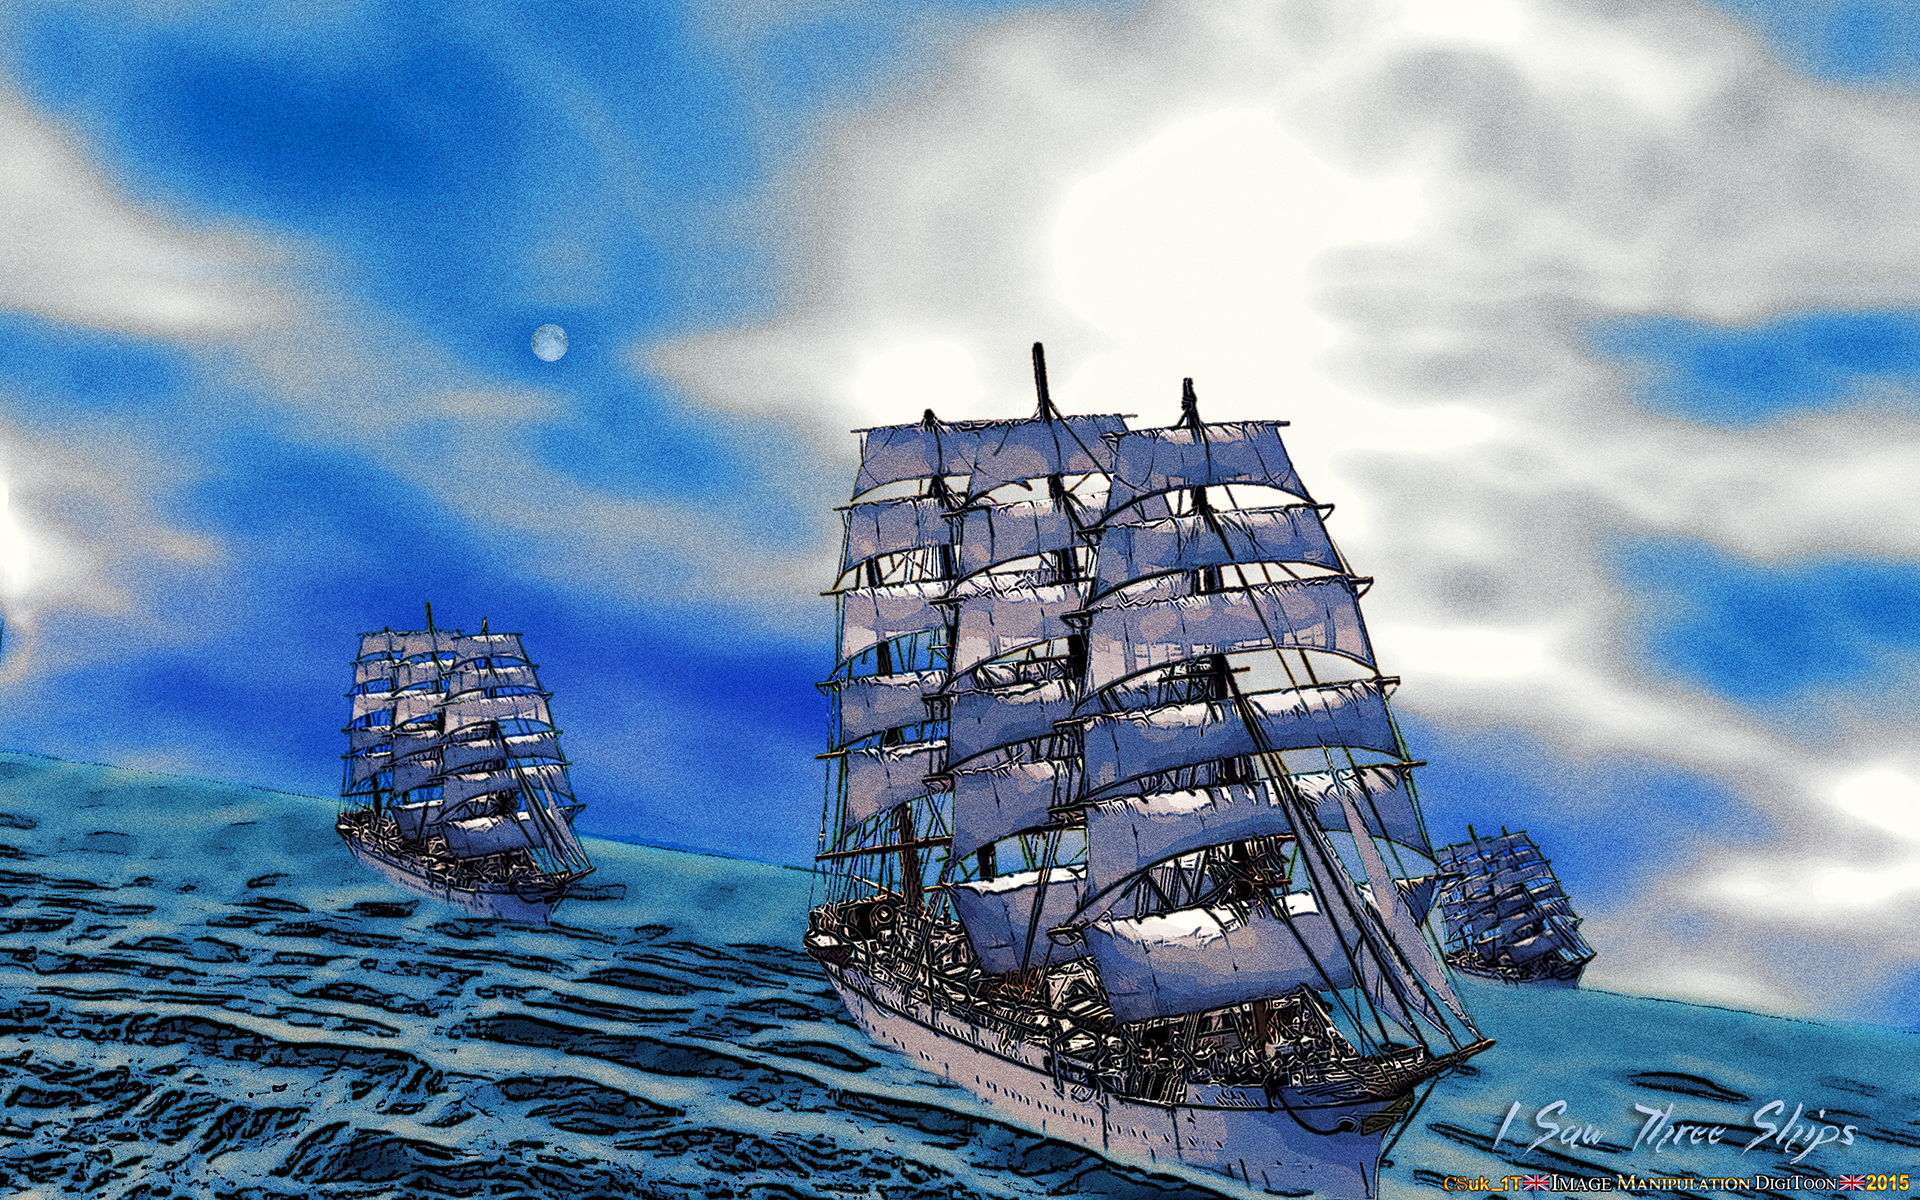 I SAW THREE SHIPS (Come sailing in) by CSuk-1T on DeviantArt